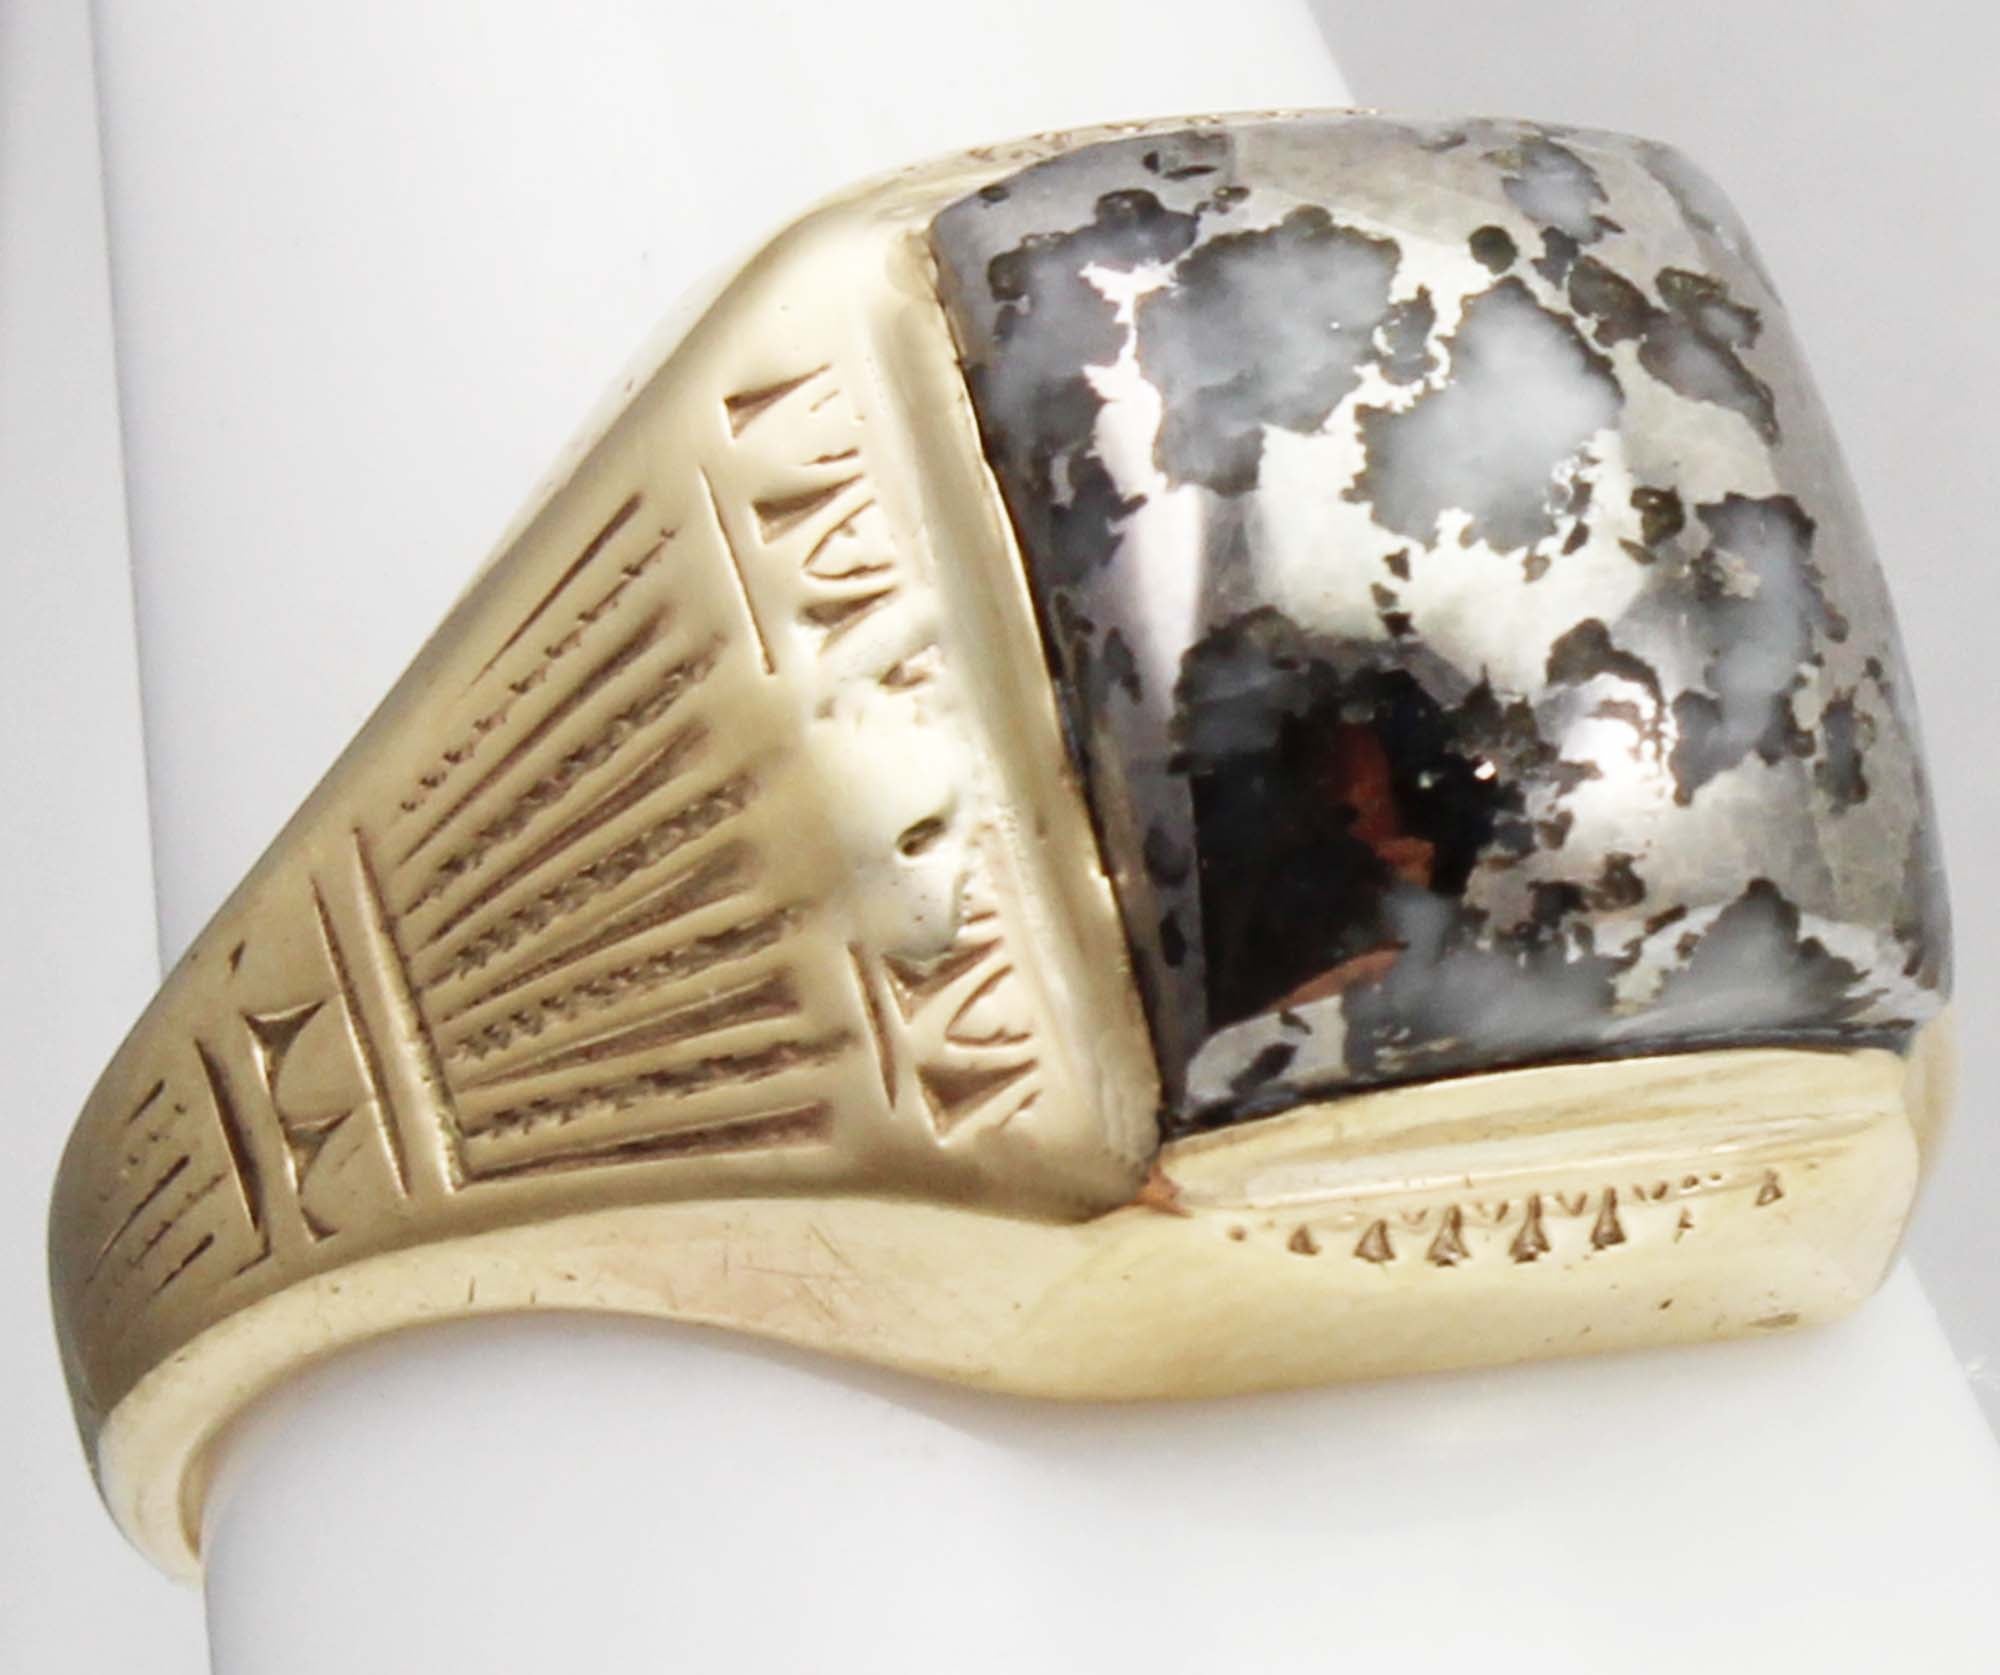 LOUIS VUITTON aparter Herren-Ring. — Discover Rare and Captivating